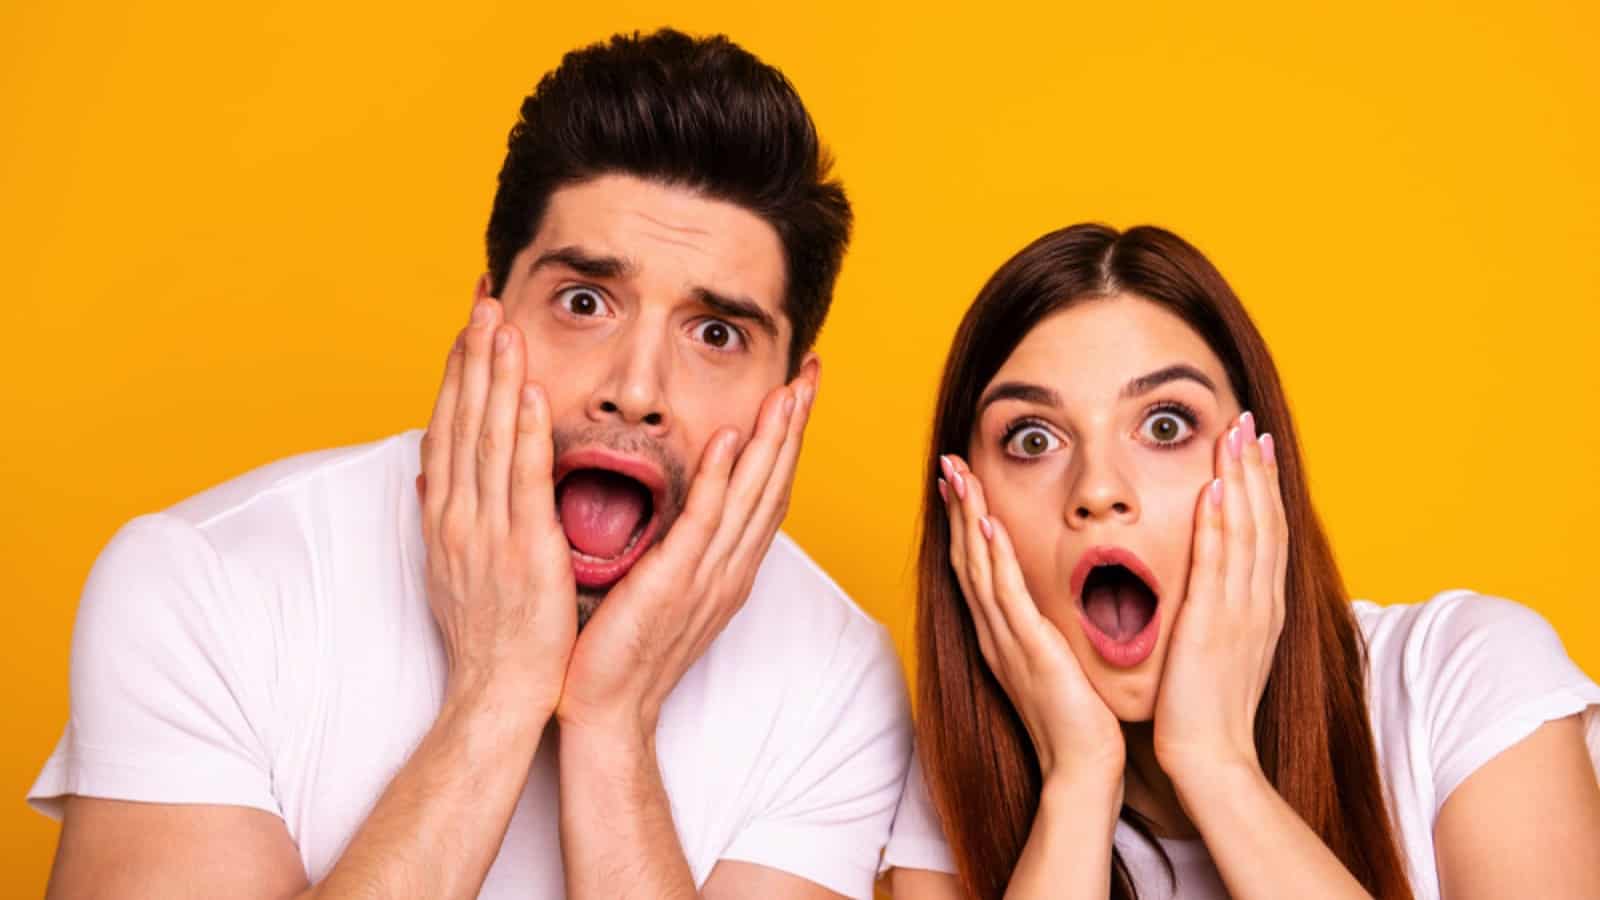 Attractive couples shocked